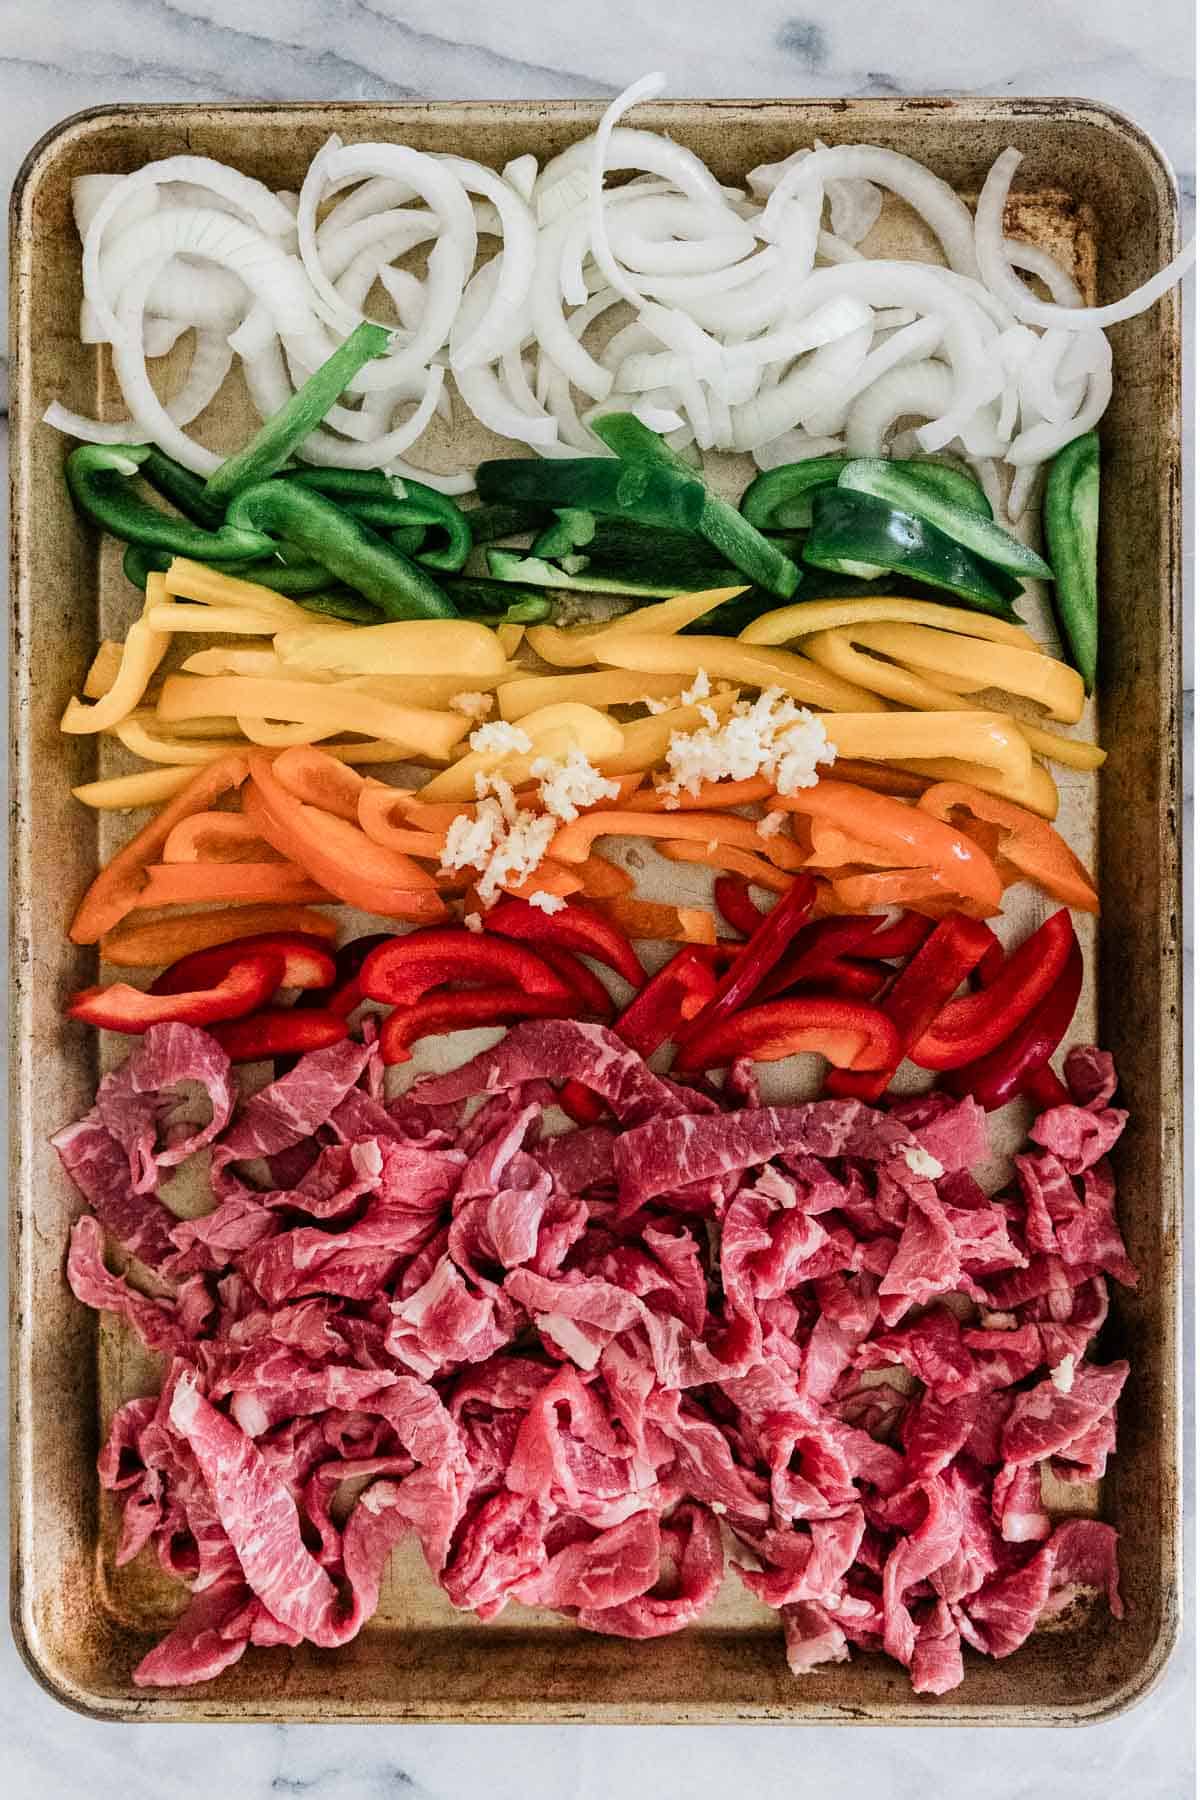 Onions, bell peppers, and steak on a sheet pan.